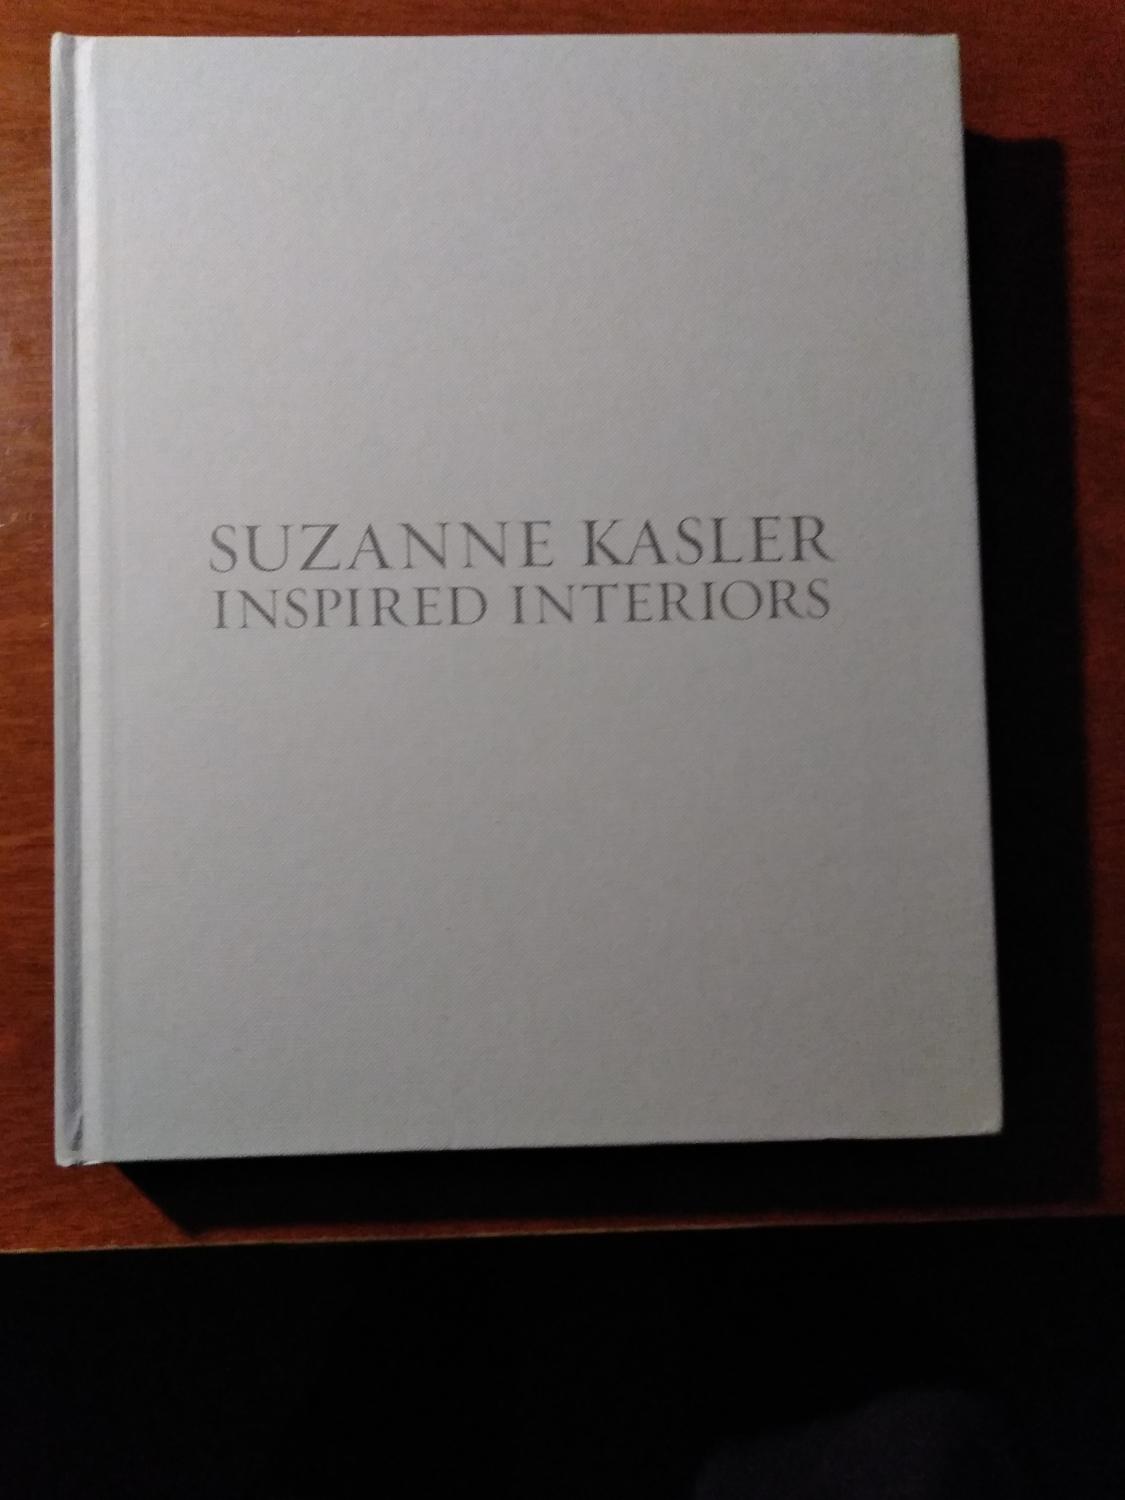 Suzanne Kasler Inspired Interiors Only